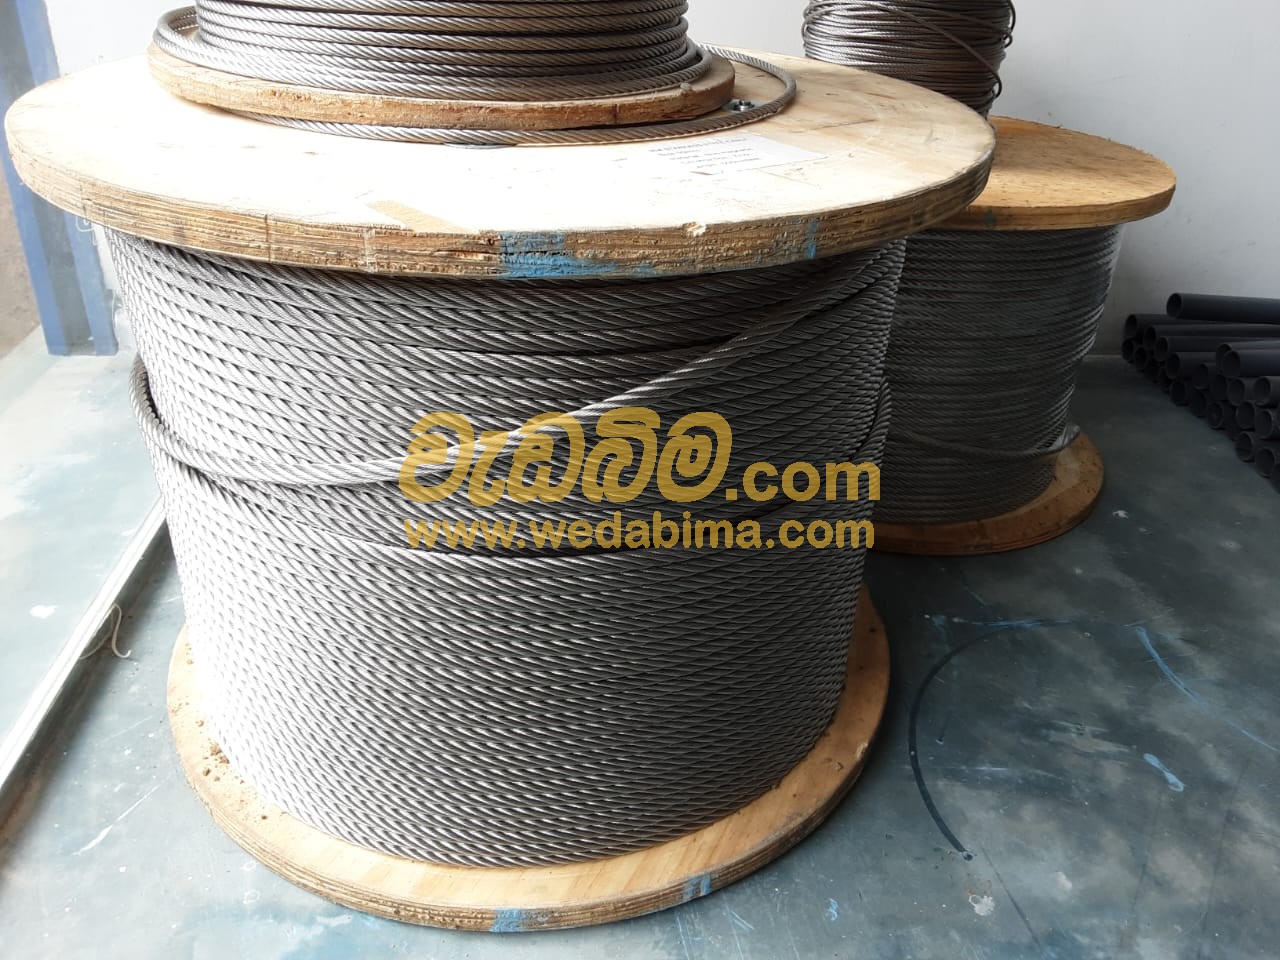 8mm Stainless Steel Cable Rope Price In Sri Lanka